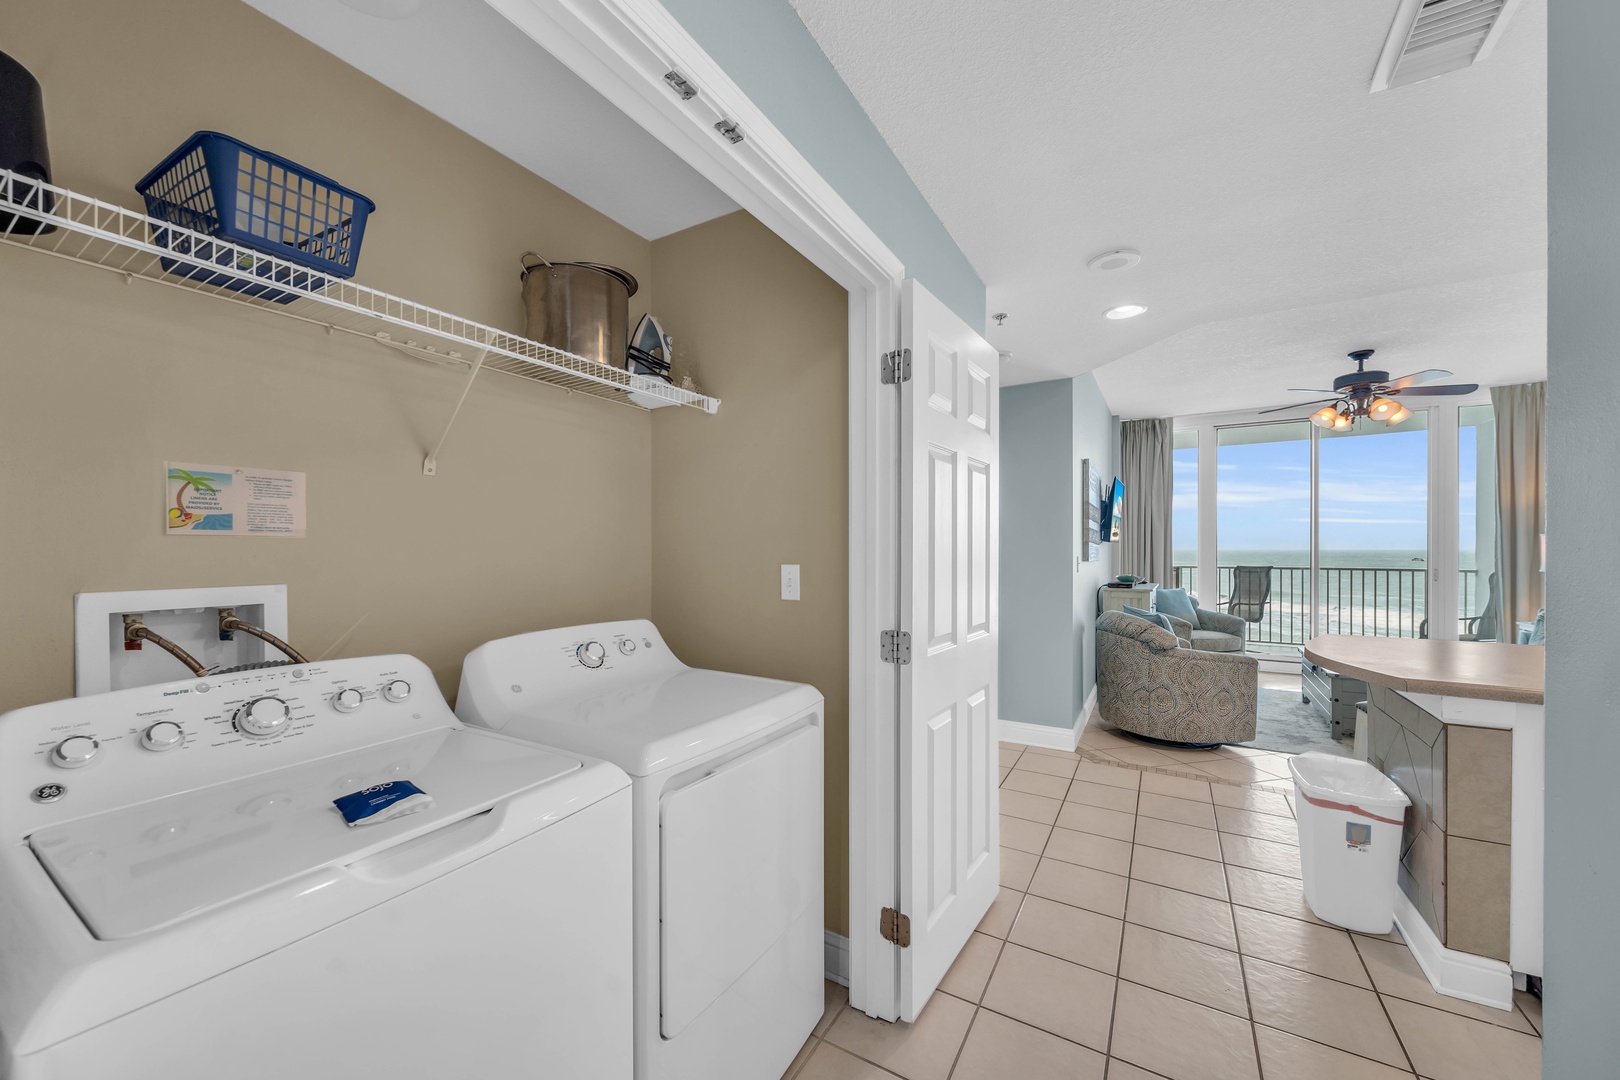 For added convenience, find a full-size washer and dryer within the unit, ensuring a stress-free stay.